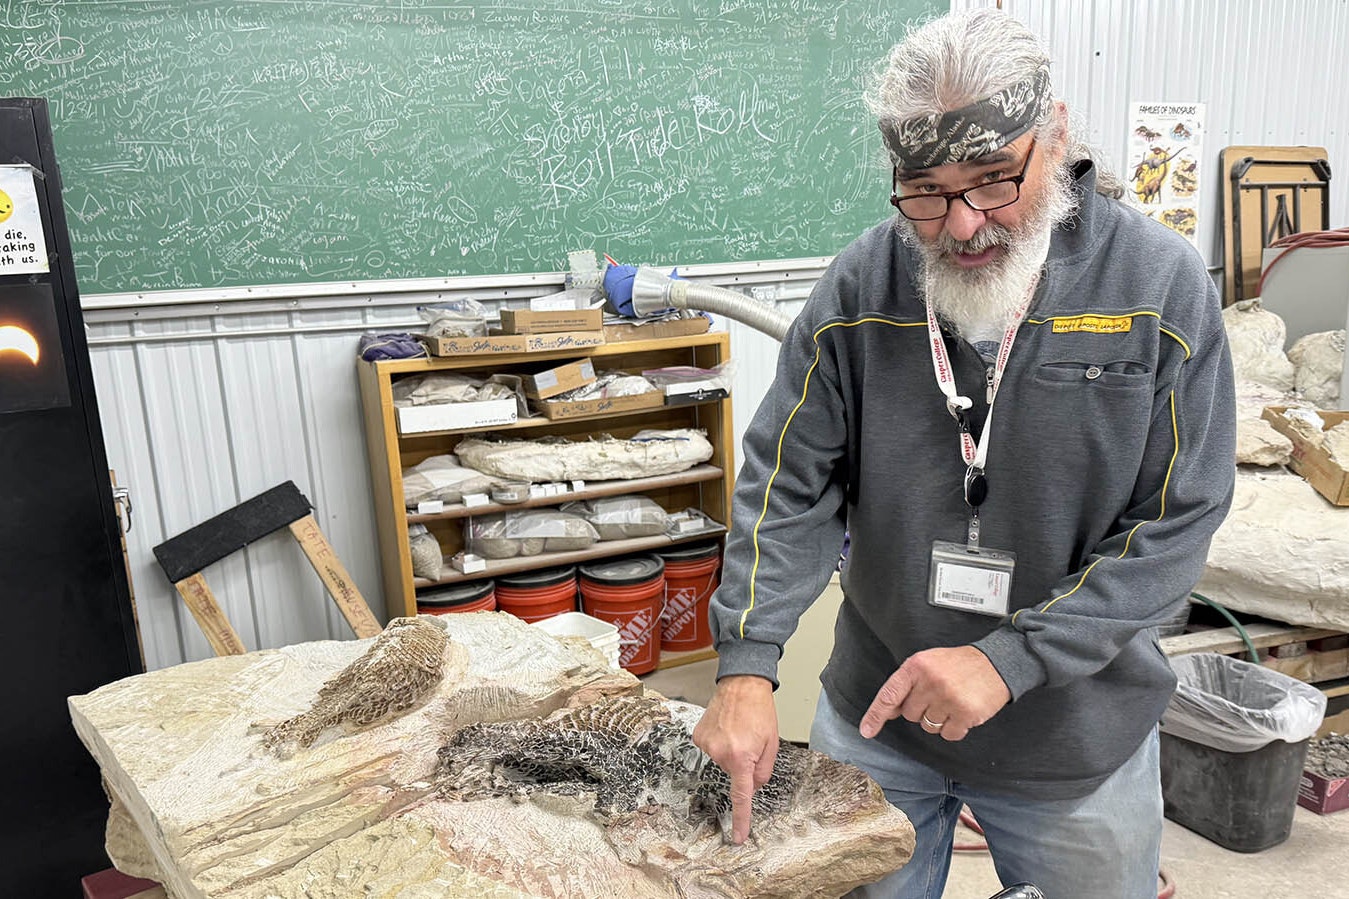 Cavigelli points out the marks left in the sandstone by a rock saw. Cavigelli, a paleontologist working at the Tate Geological Museum, plans to return to the place where this block was found to hopefully find more well-preserved fossils from the Wasatch Formation, which could reveal crocodiles, turtles, fish and other animals.